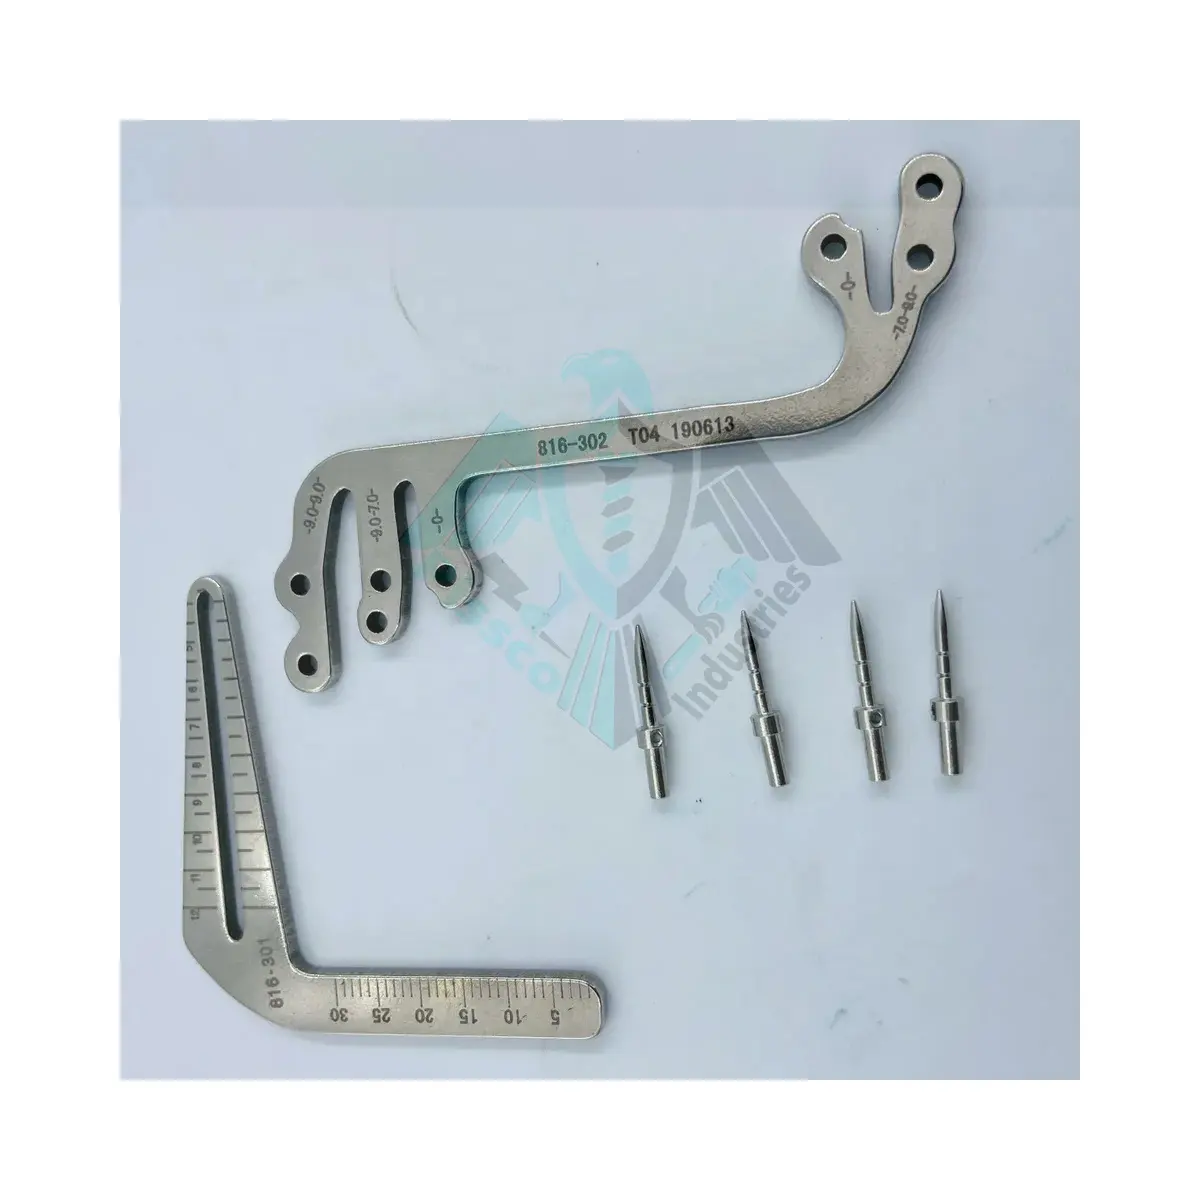 Best Company Pissco For Kit 6 Pc Dental Implant Surgical Parallel Drilling Guide Locator Depth Pin Gauge German Stainless Steel